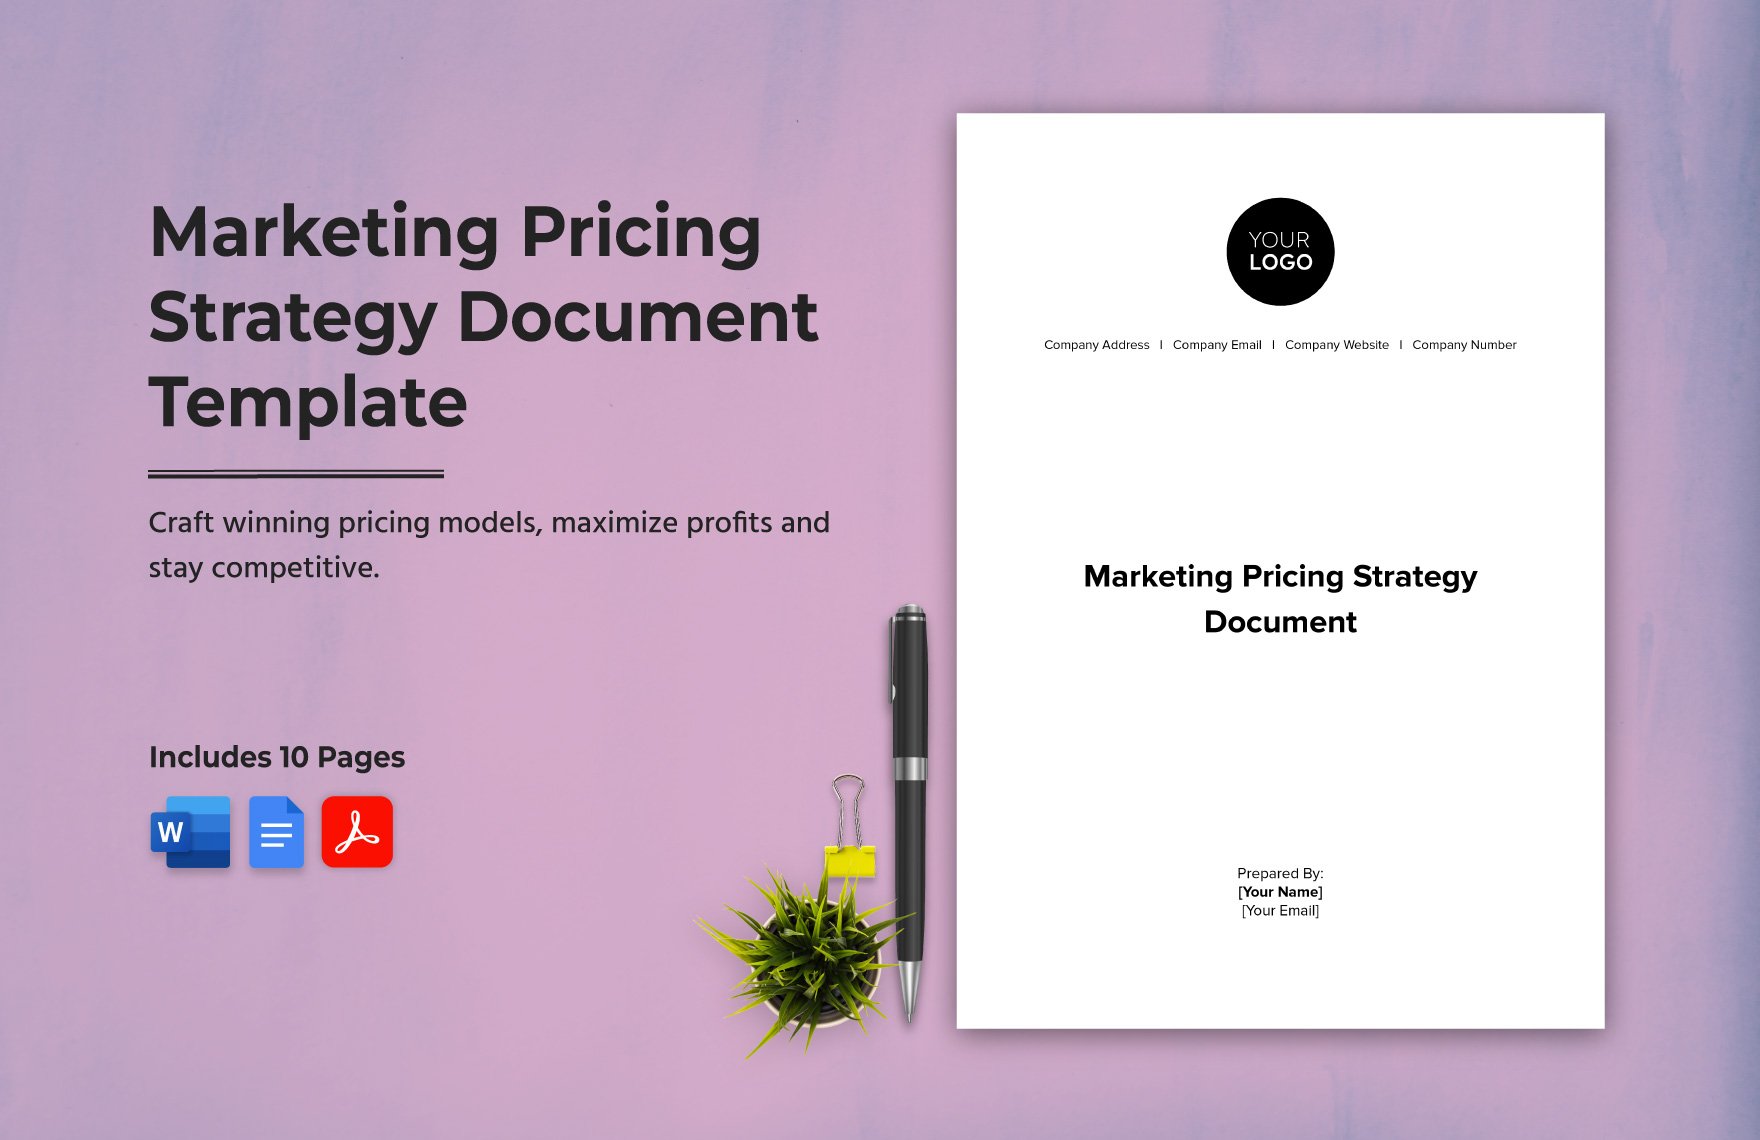 Marketing Pricing Strategy Document Template in Word, Google Docs, PDF